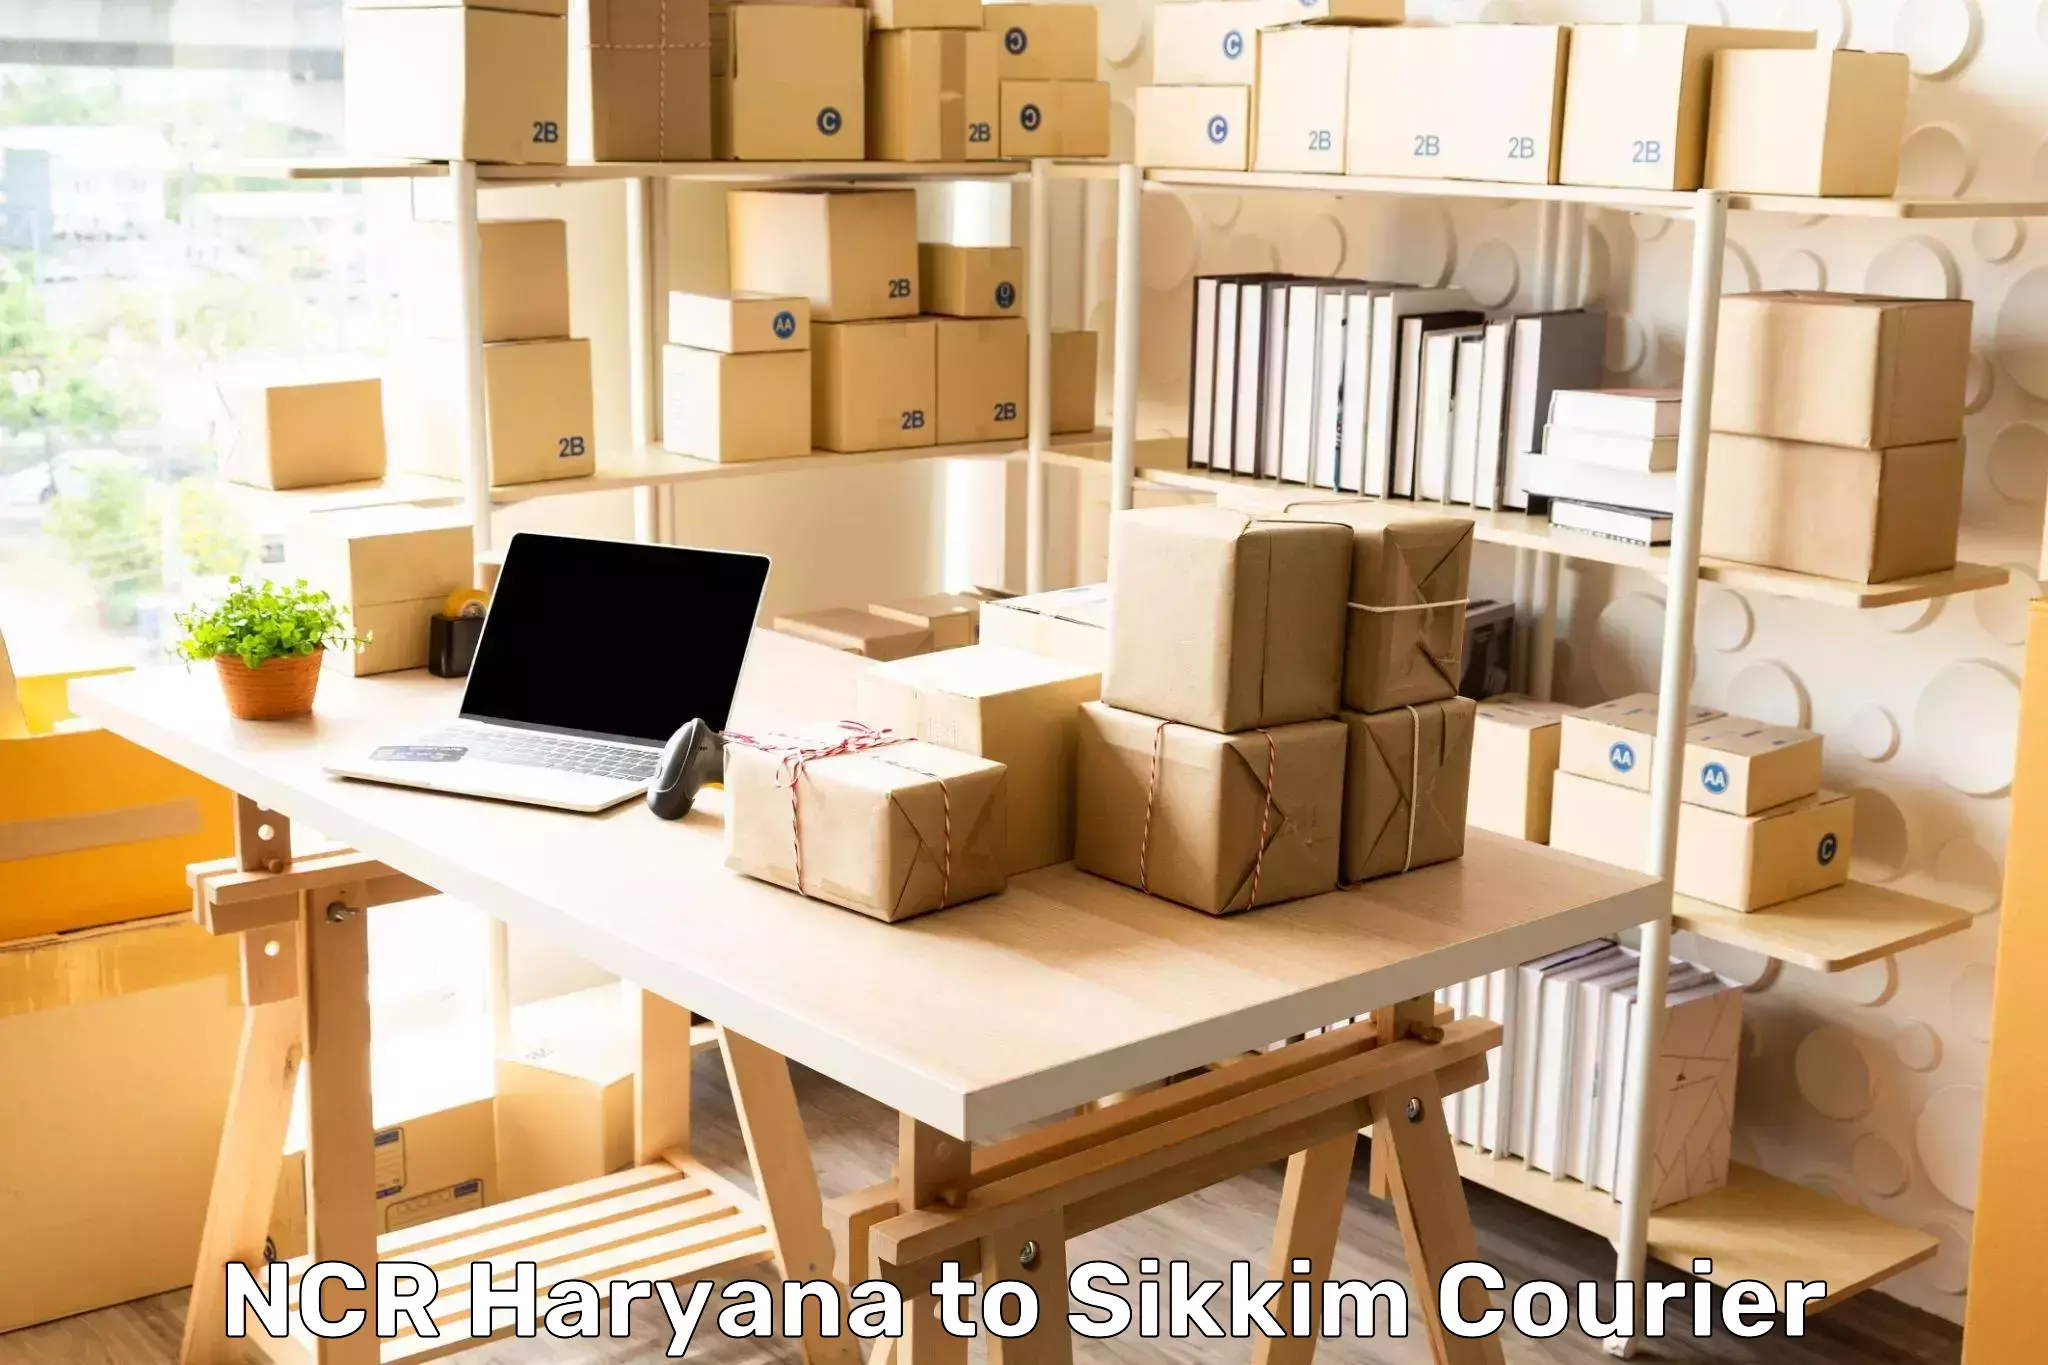 Courier tracking online NCR Haryana to Pelling